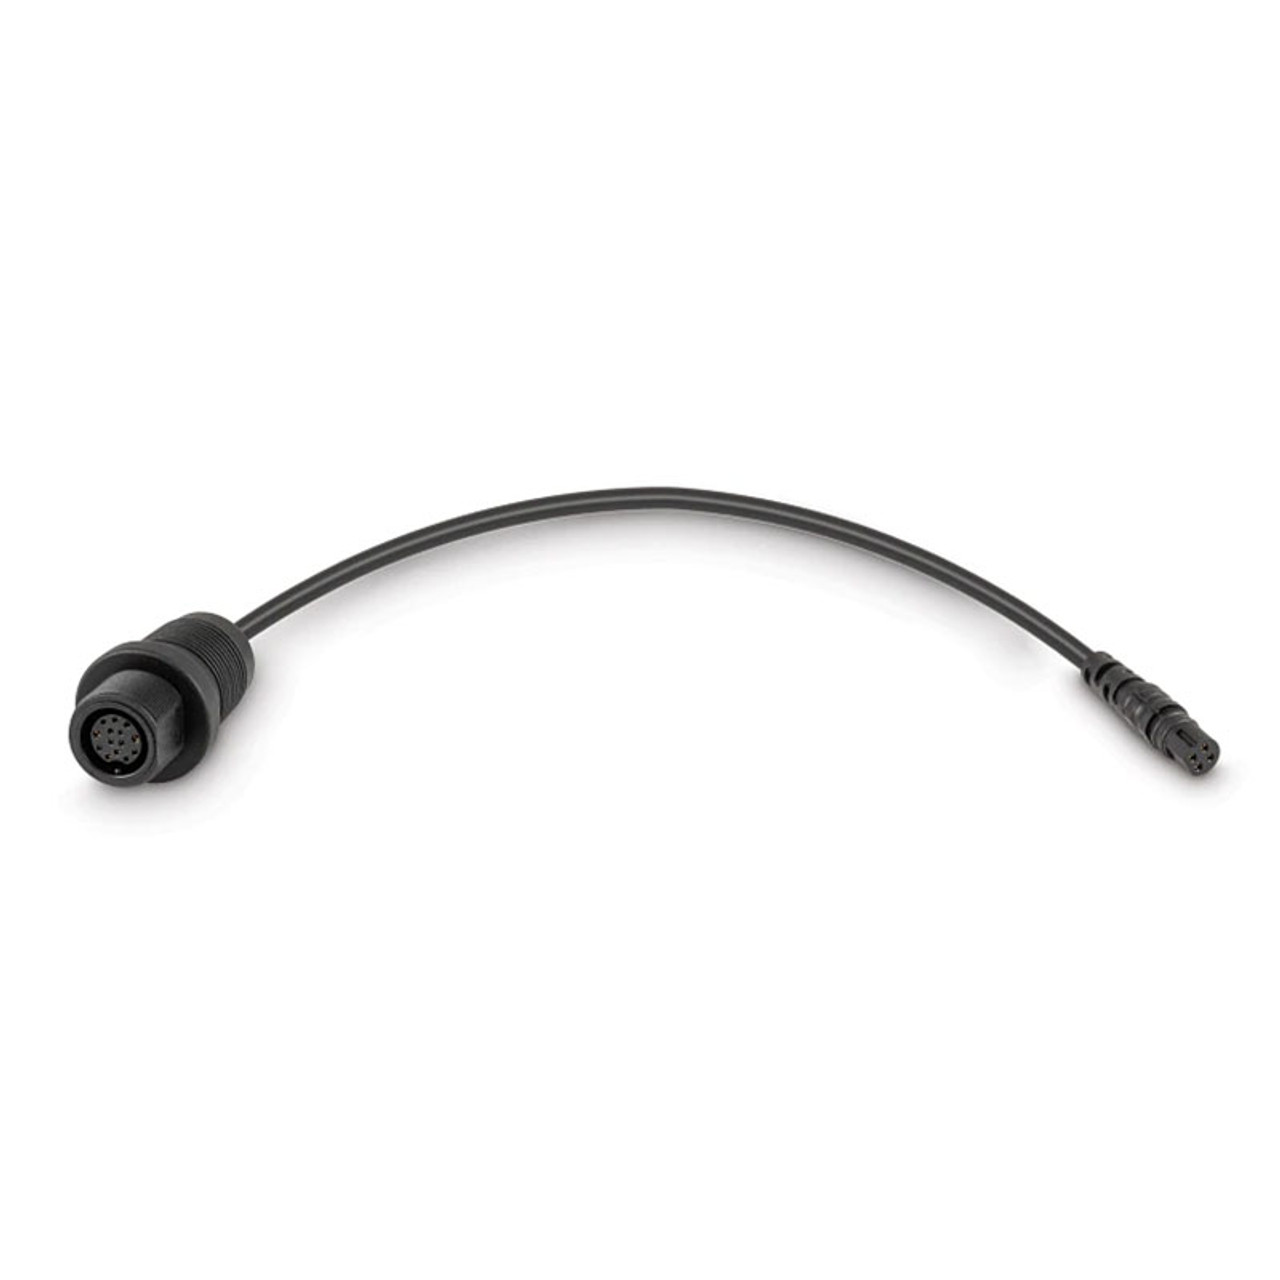 MKR-DSC-12 Garmin 4-Pin Adapter Cable